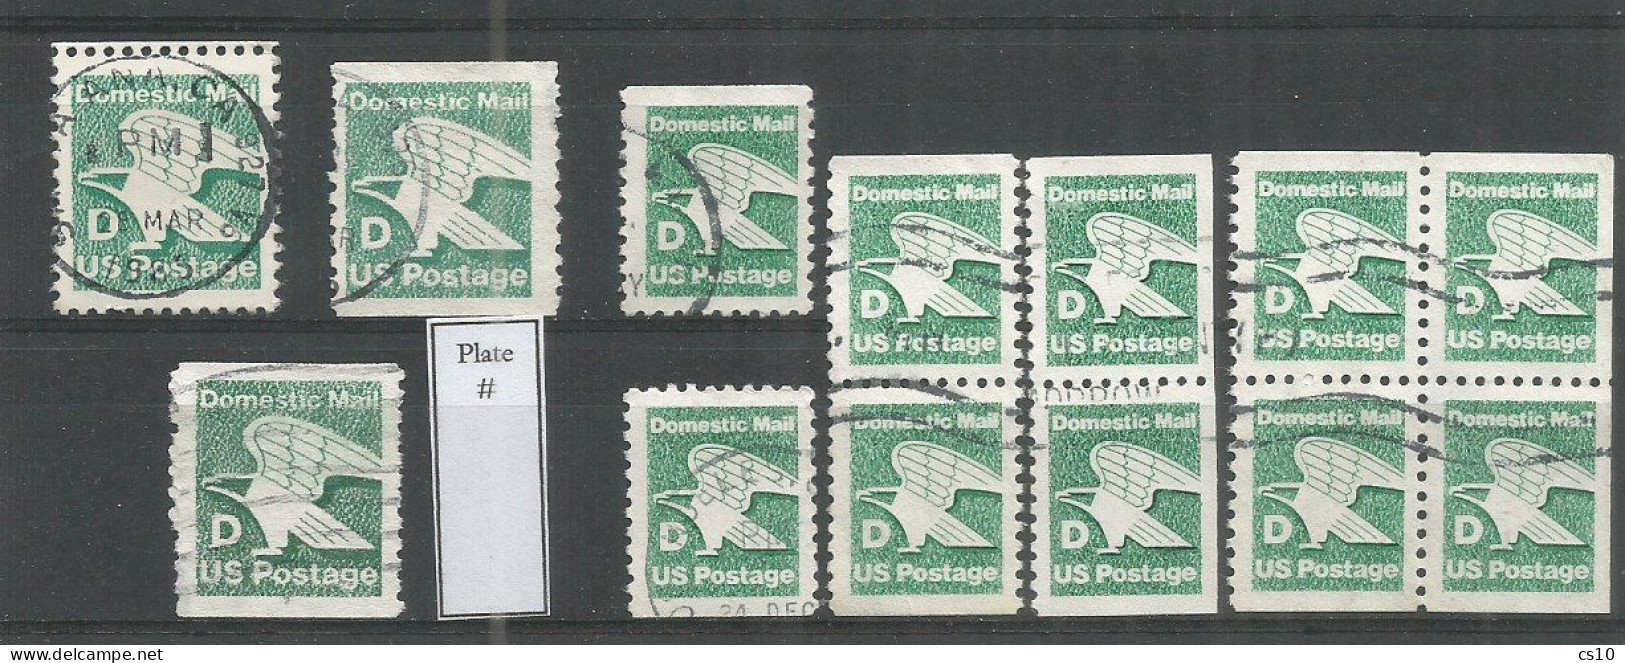 USA 1985 Eagle Domestic Rate "D" SC.#2111/13 Cpl Issue From Sheets + Coil + Plate # + Booklet Pane + Pairs + Singles VFU - Roulettes (Numéros De Planches)